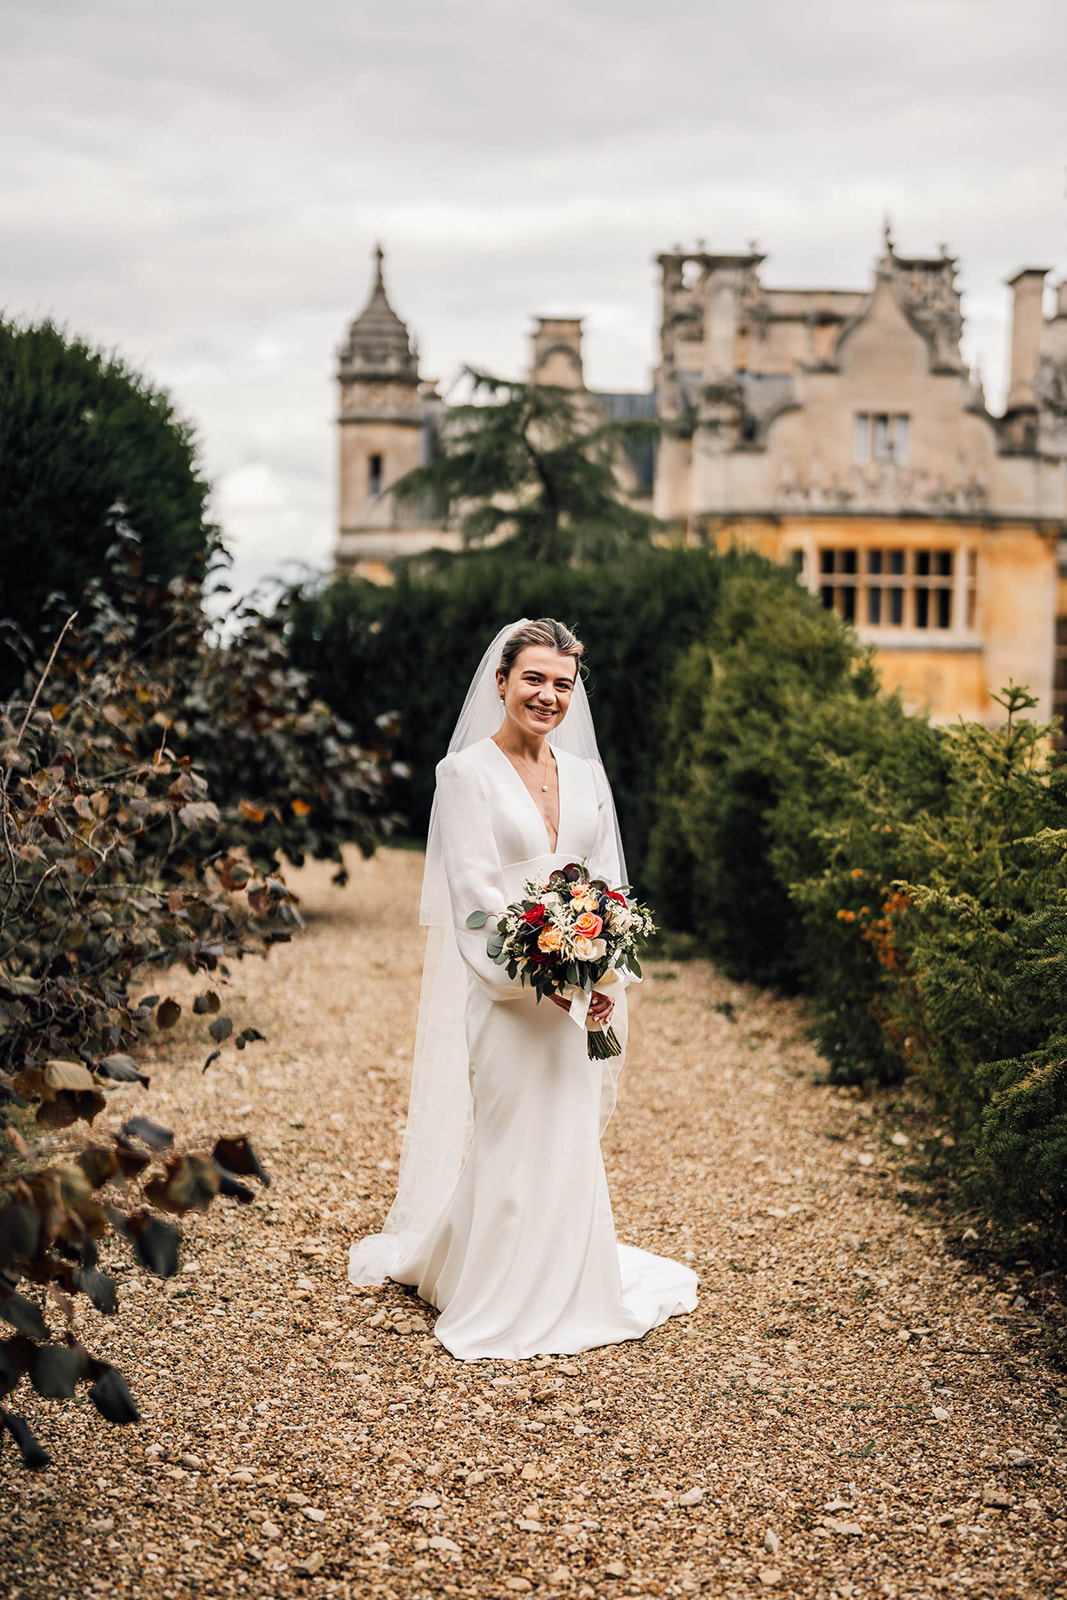 portrait of the bride at Harlaxton manor